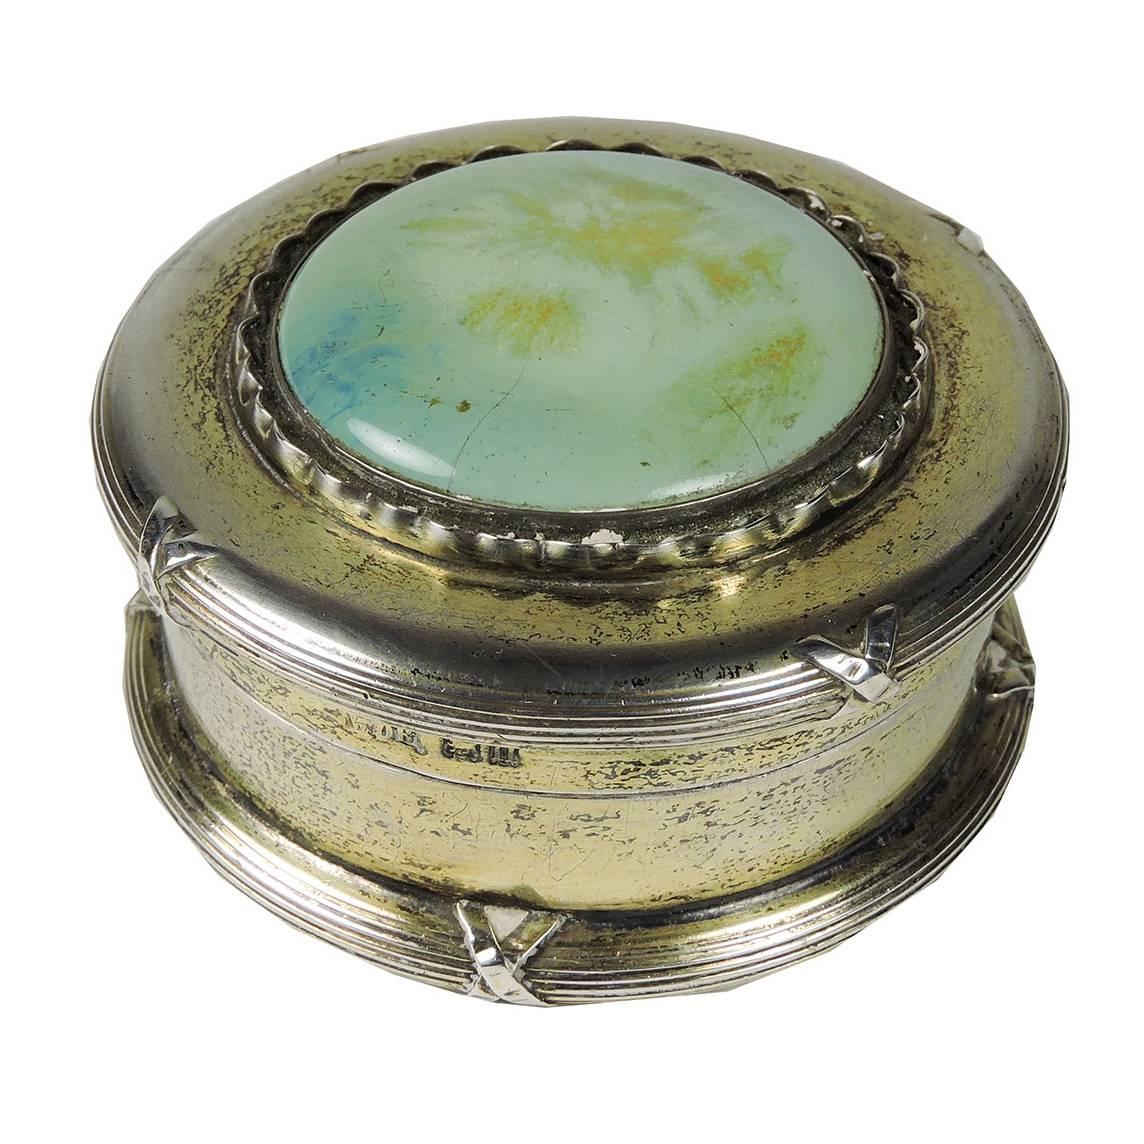 English Arts & Crafts Period Silver and Persian Turquoise Powder Box